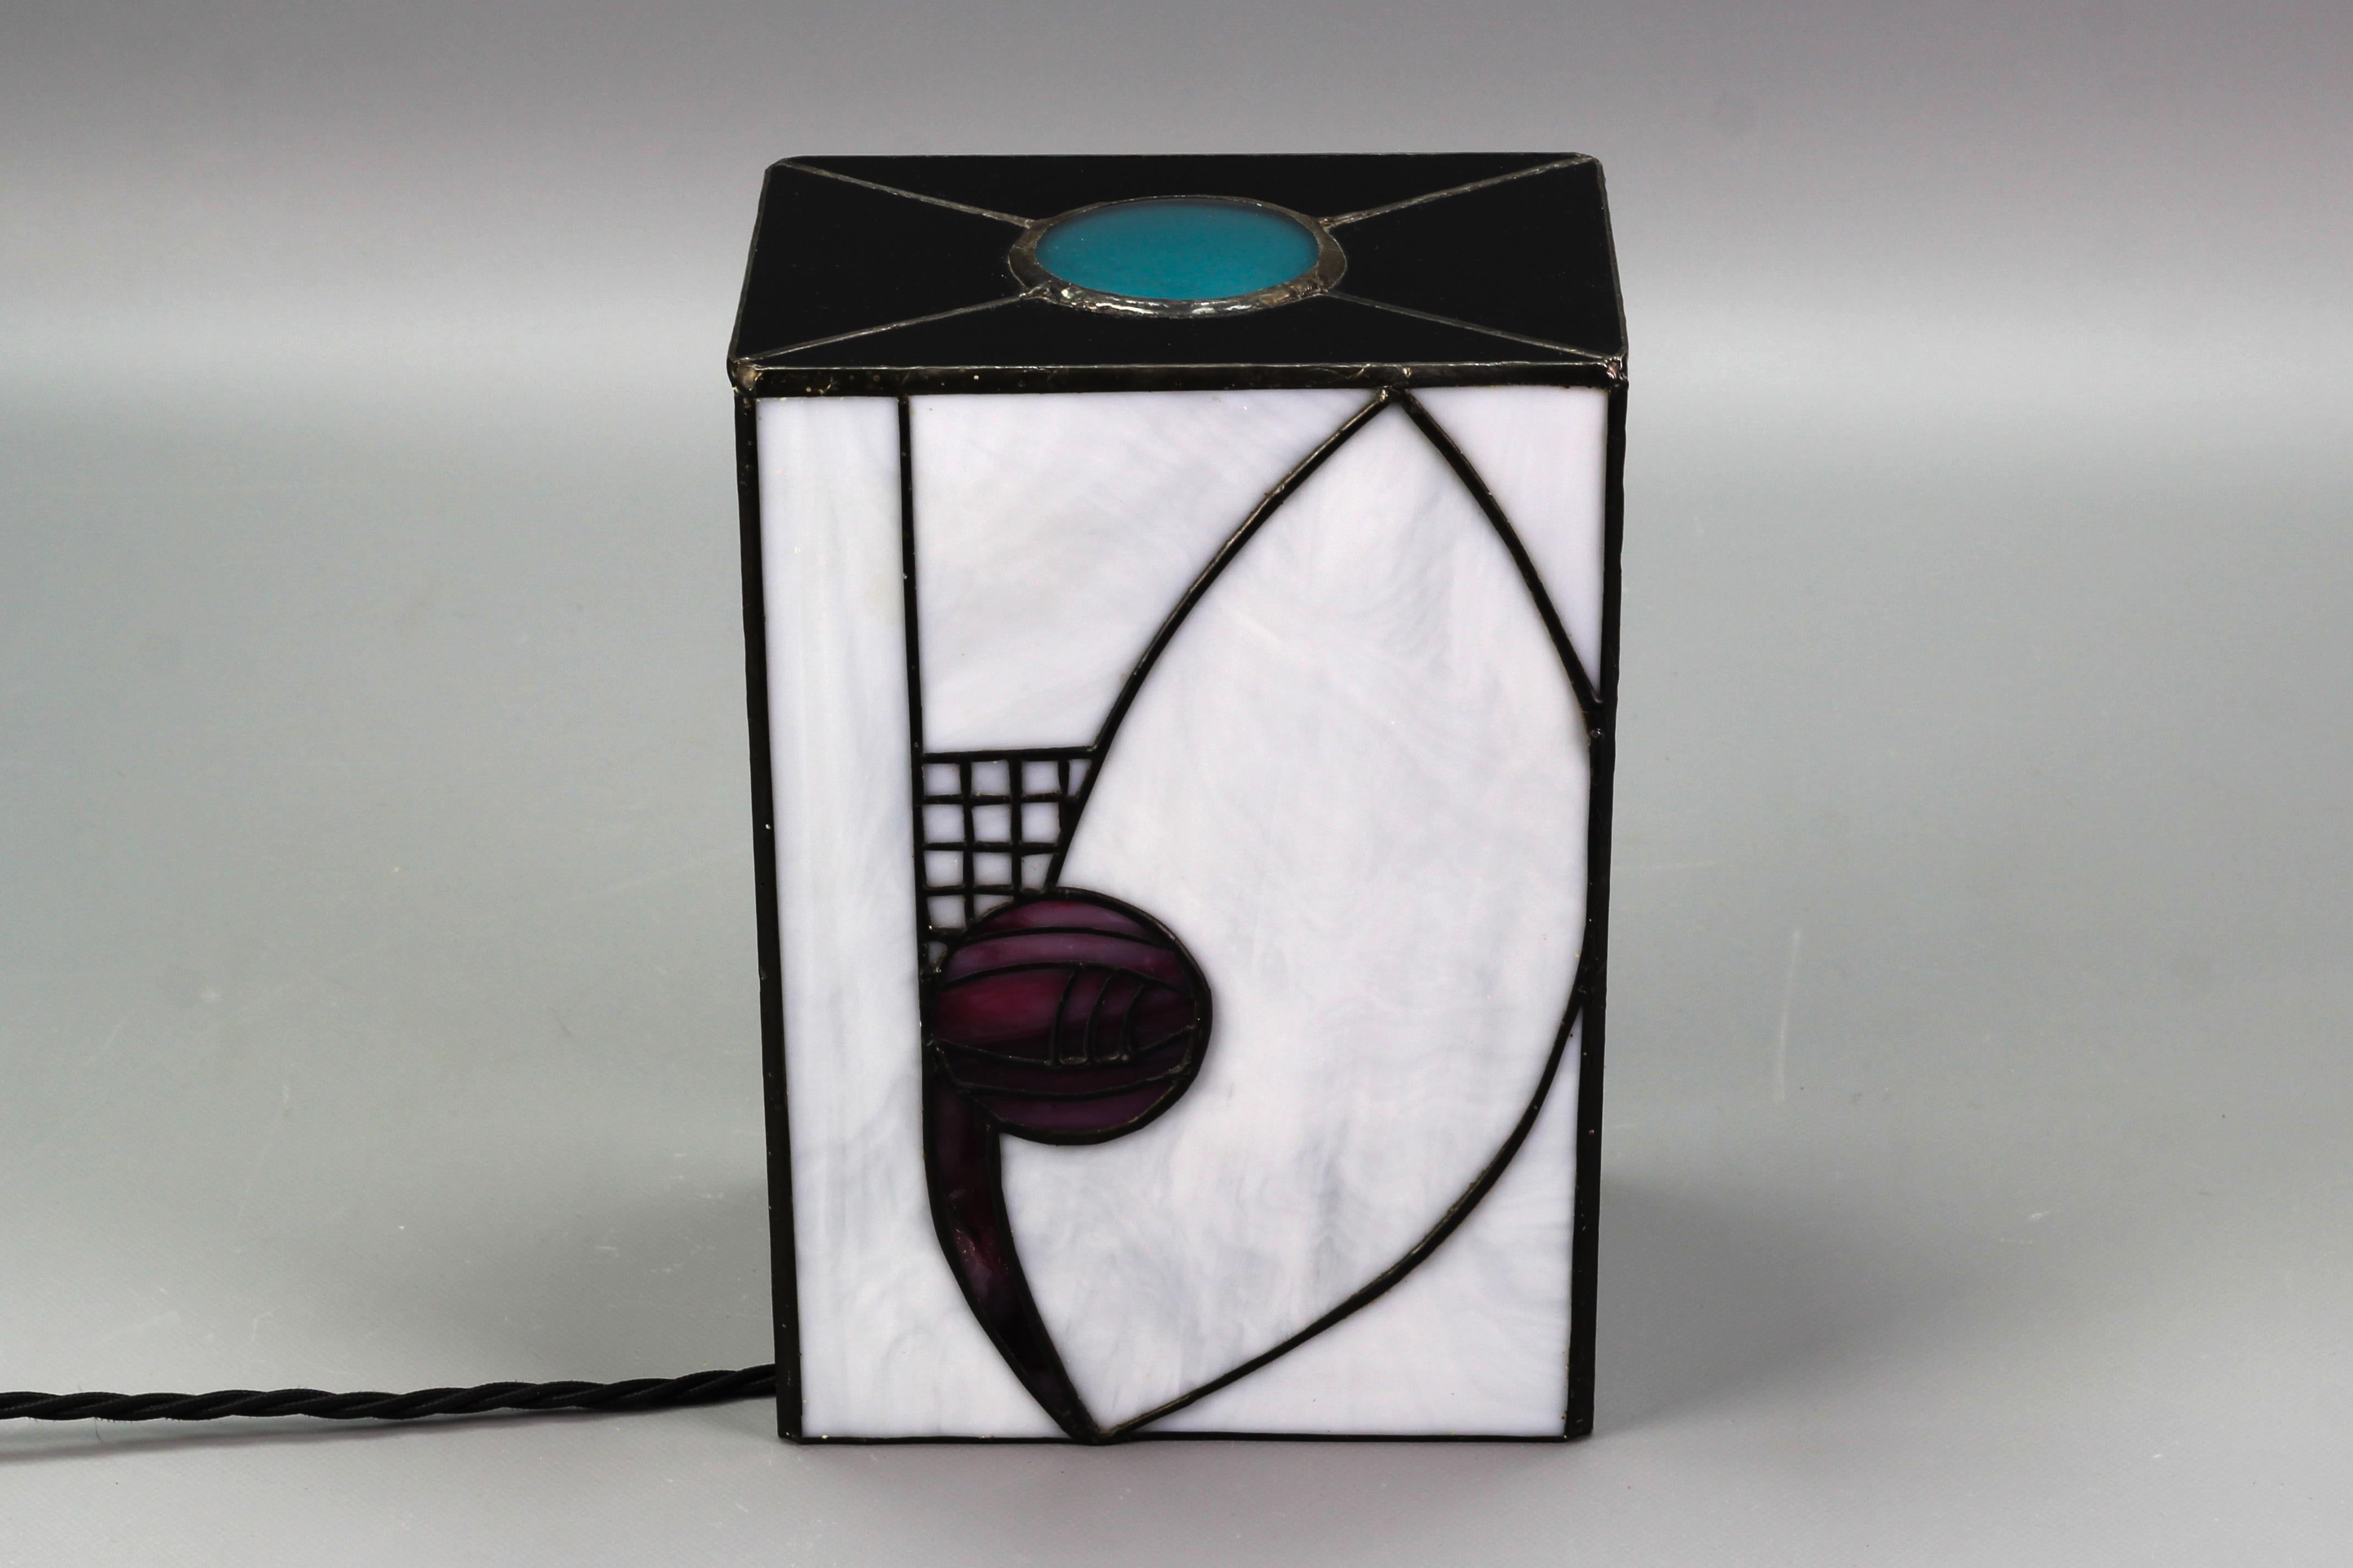 Beautiful Art Deco-style stained glass lamp in black and white with geometrical accents in purple and turquoise. The lamp looks wonderful as well as lit as unlit. When lit, the dark glass looks very dark purple.
One socket for E27 (E26) light bulb.